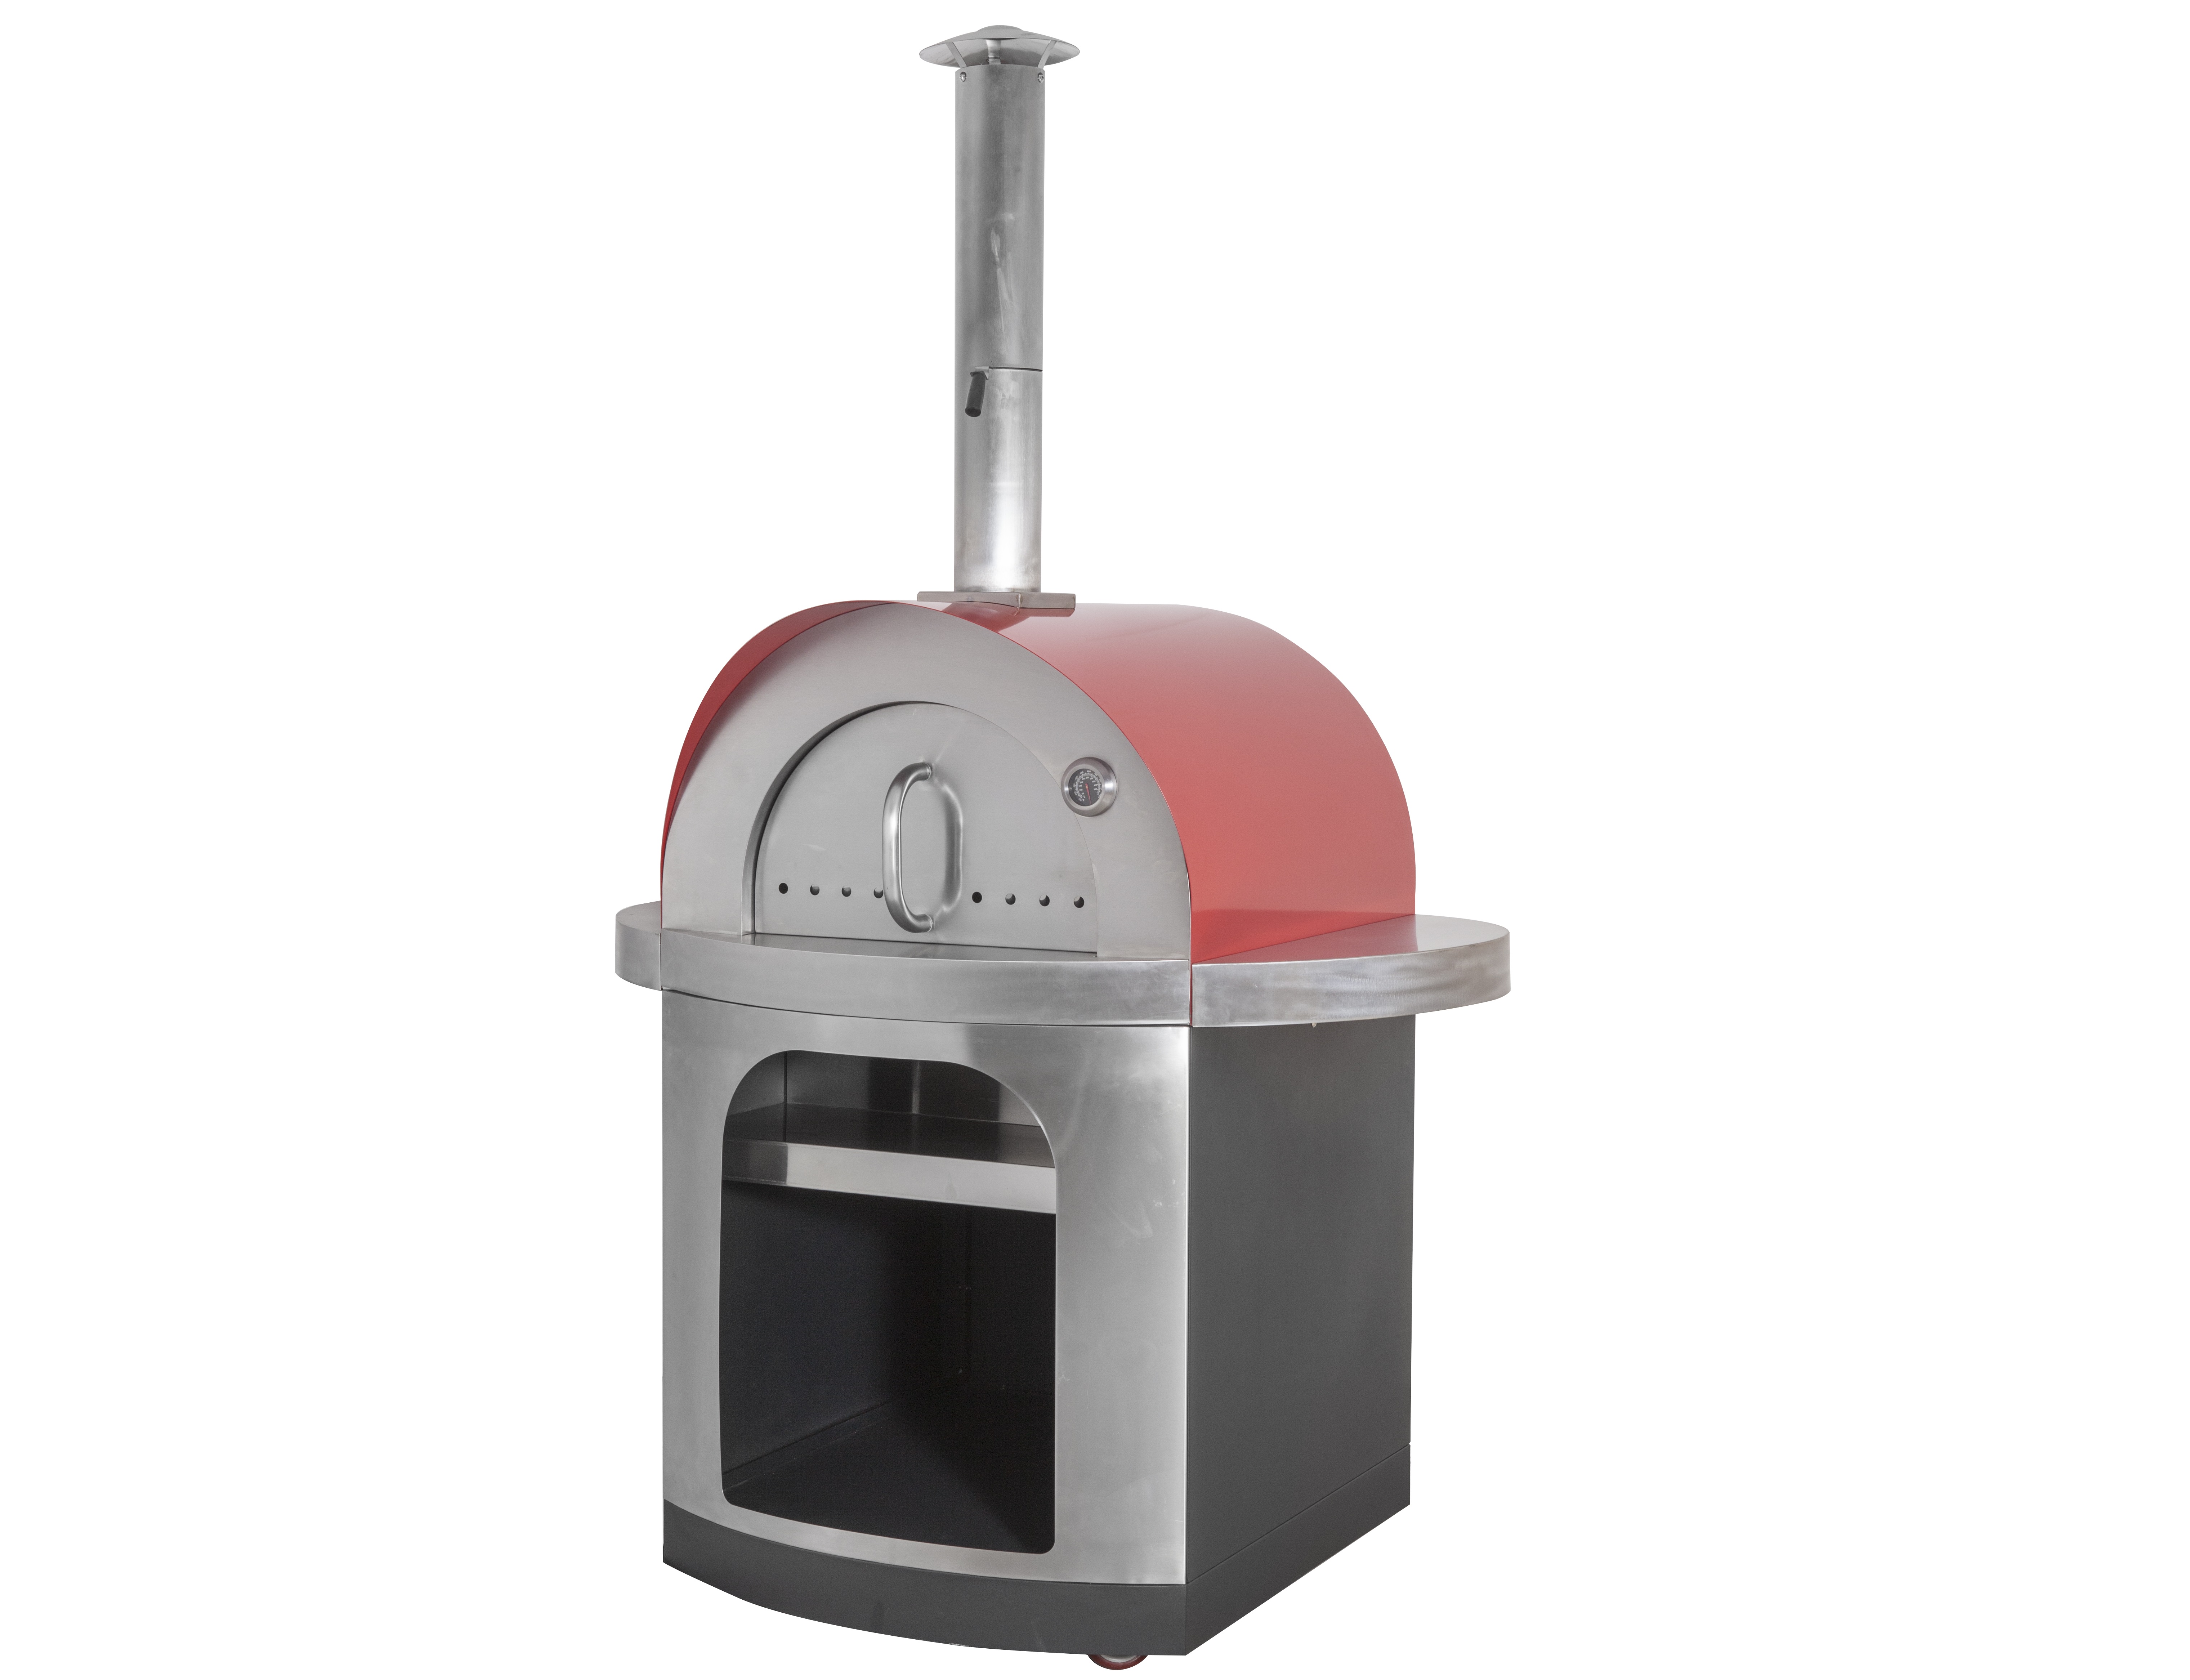 OUTDOOR HOME USE WOOD FIRED PIZZA OVEN KU-005W